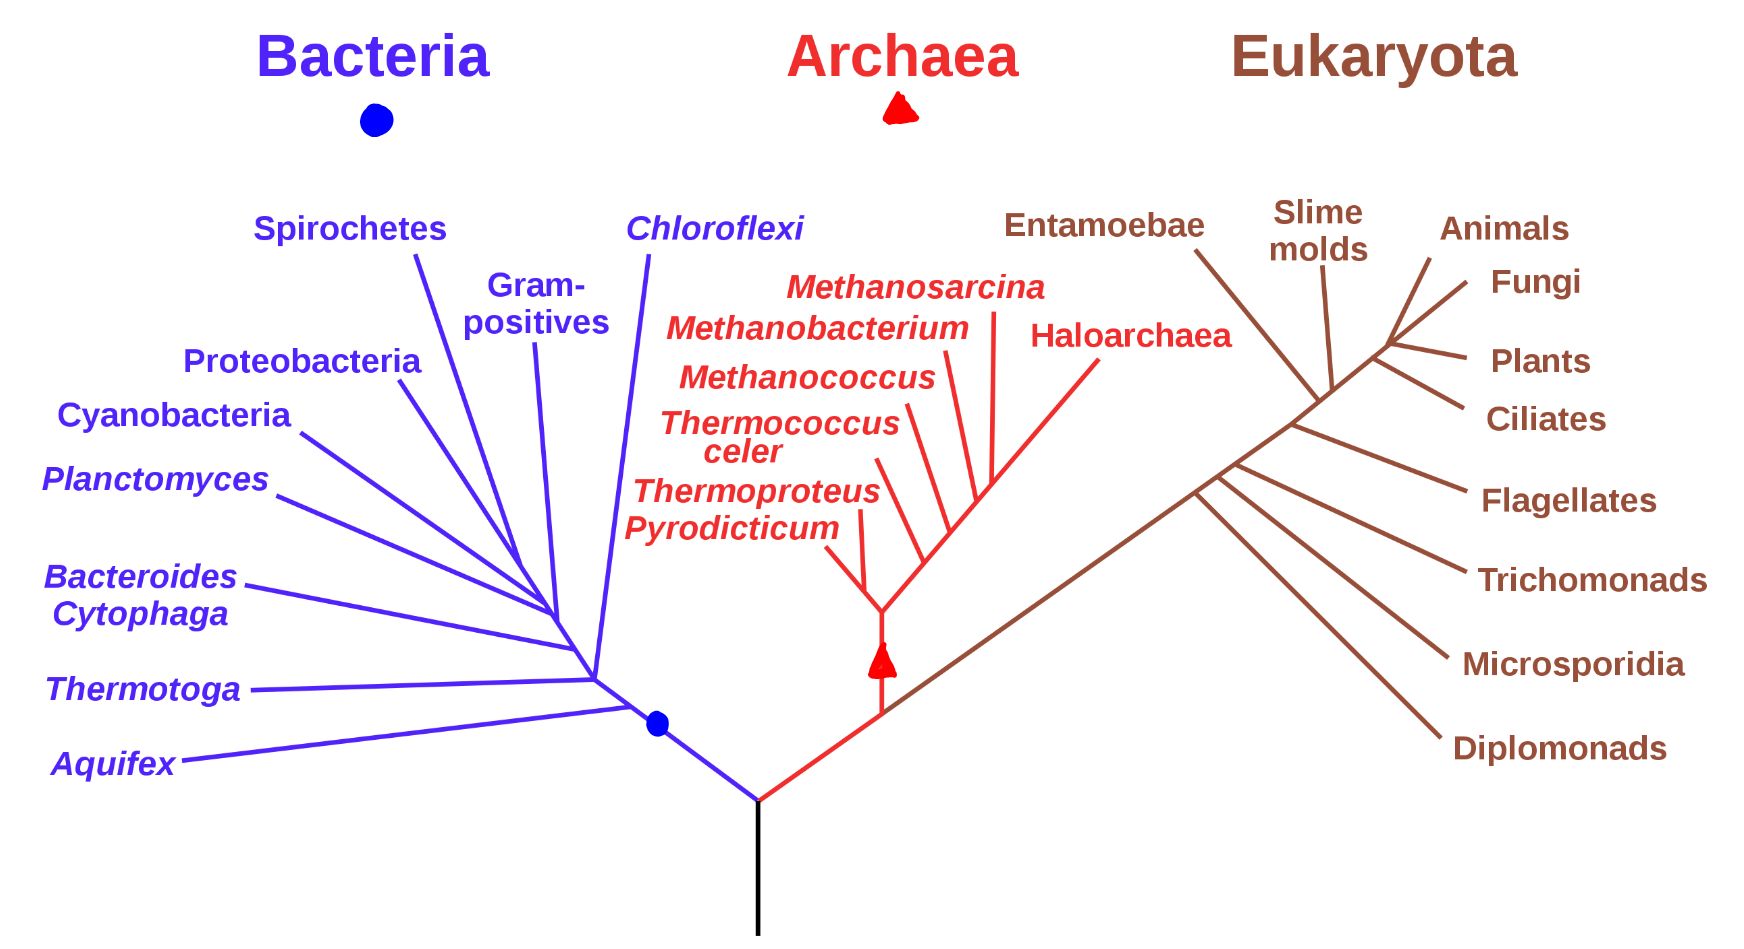 A branching tree diagram depicting the relationships between three domains of living organisms: Bacteria, Archaea, and Eukaryota